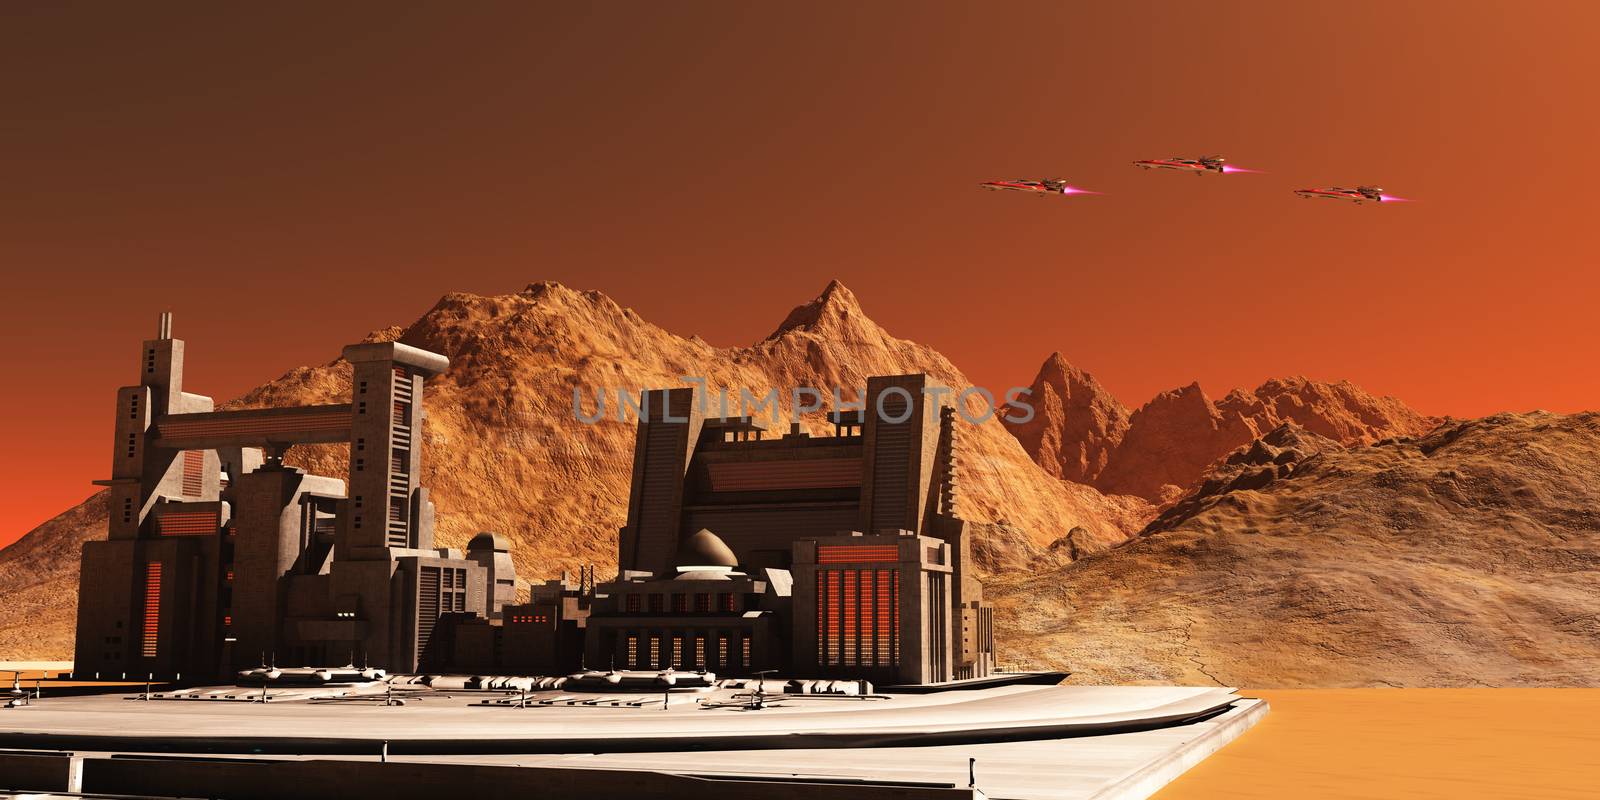 Three spacecraft fly near an installation habitat on the red planet of Mars in the future.